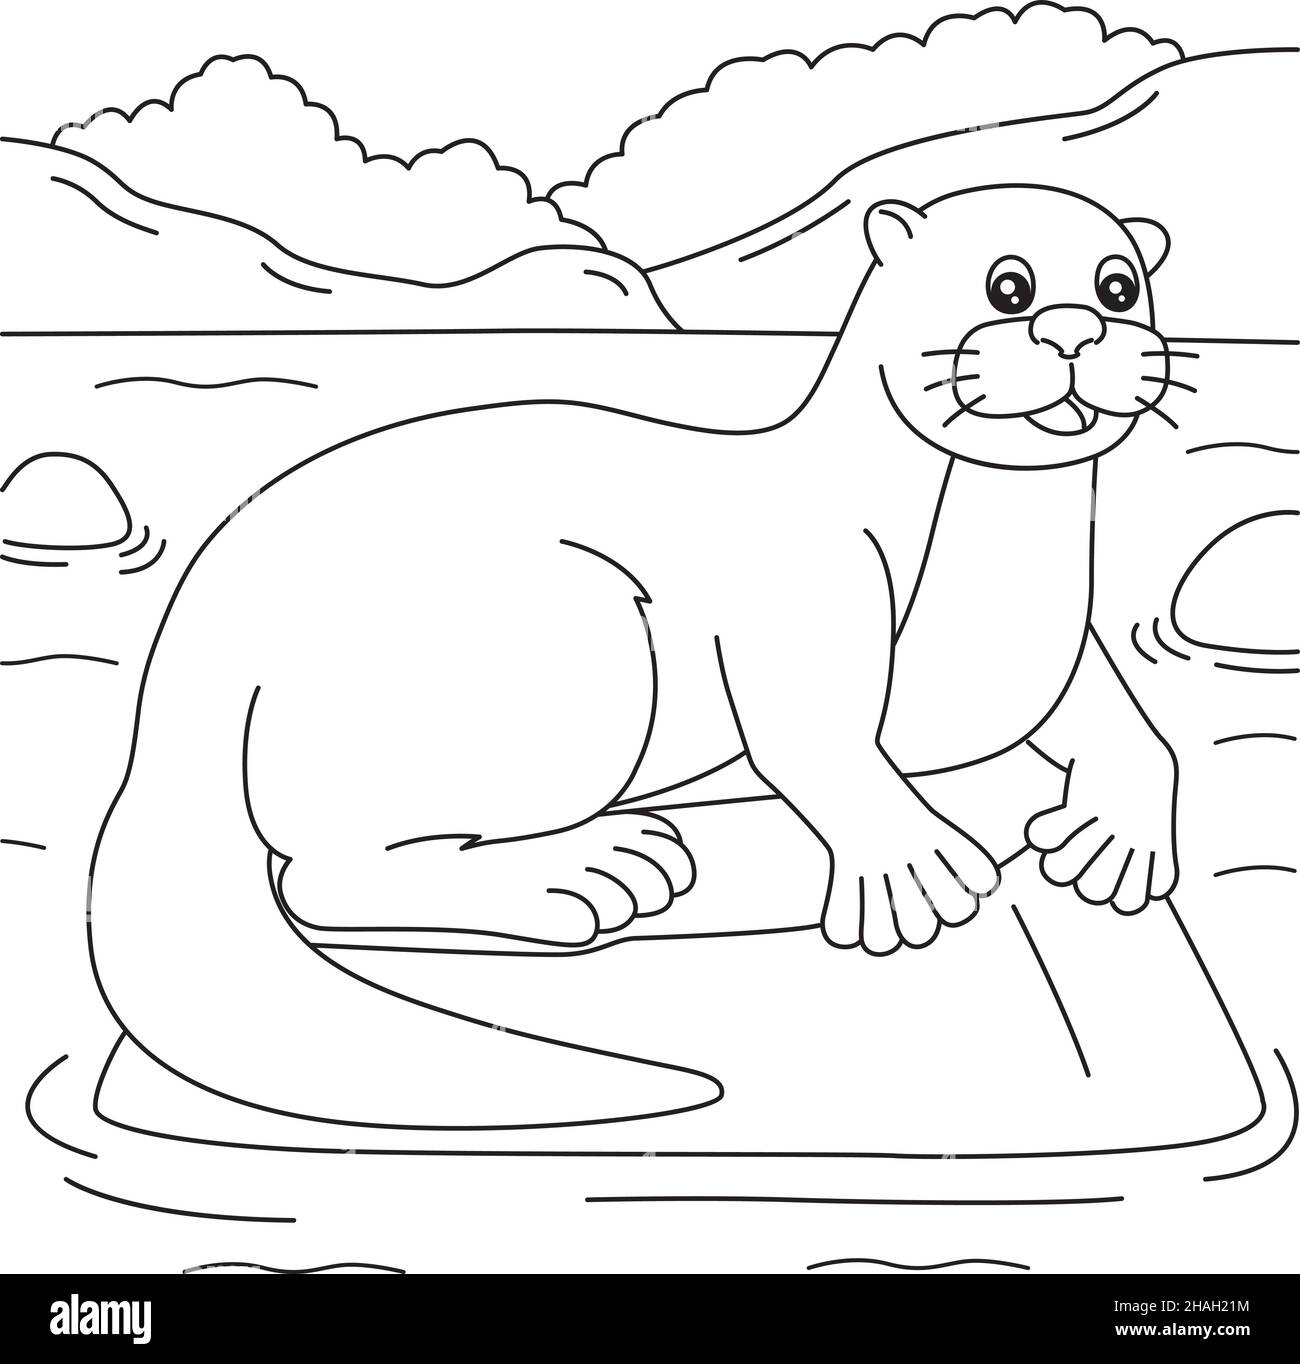 River Otter Coloring Page for Kids Stock Vector